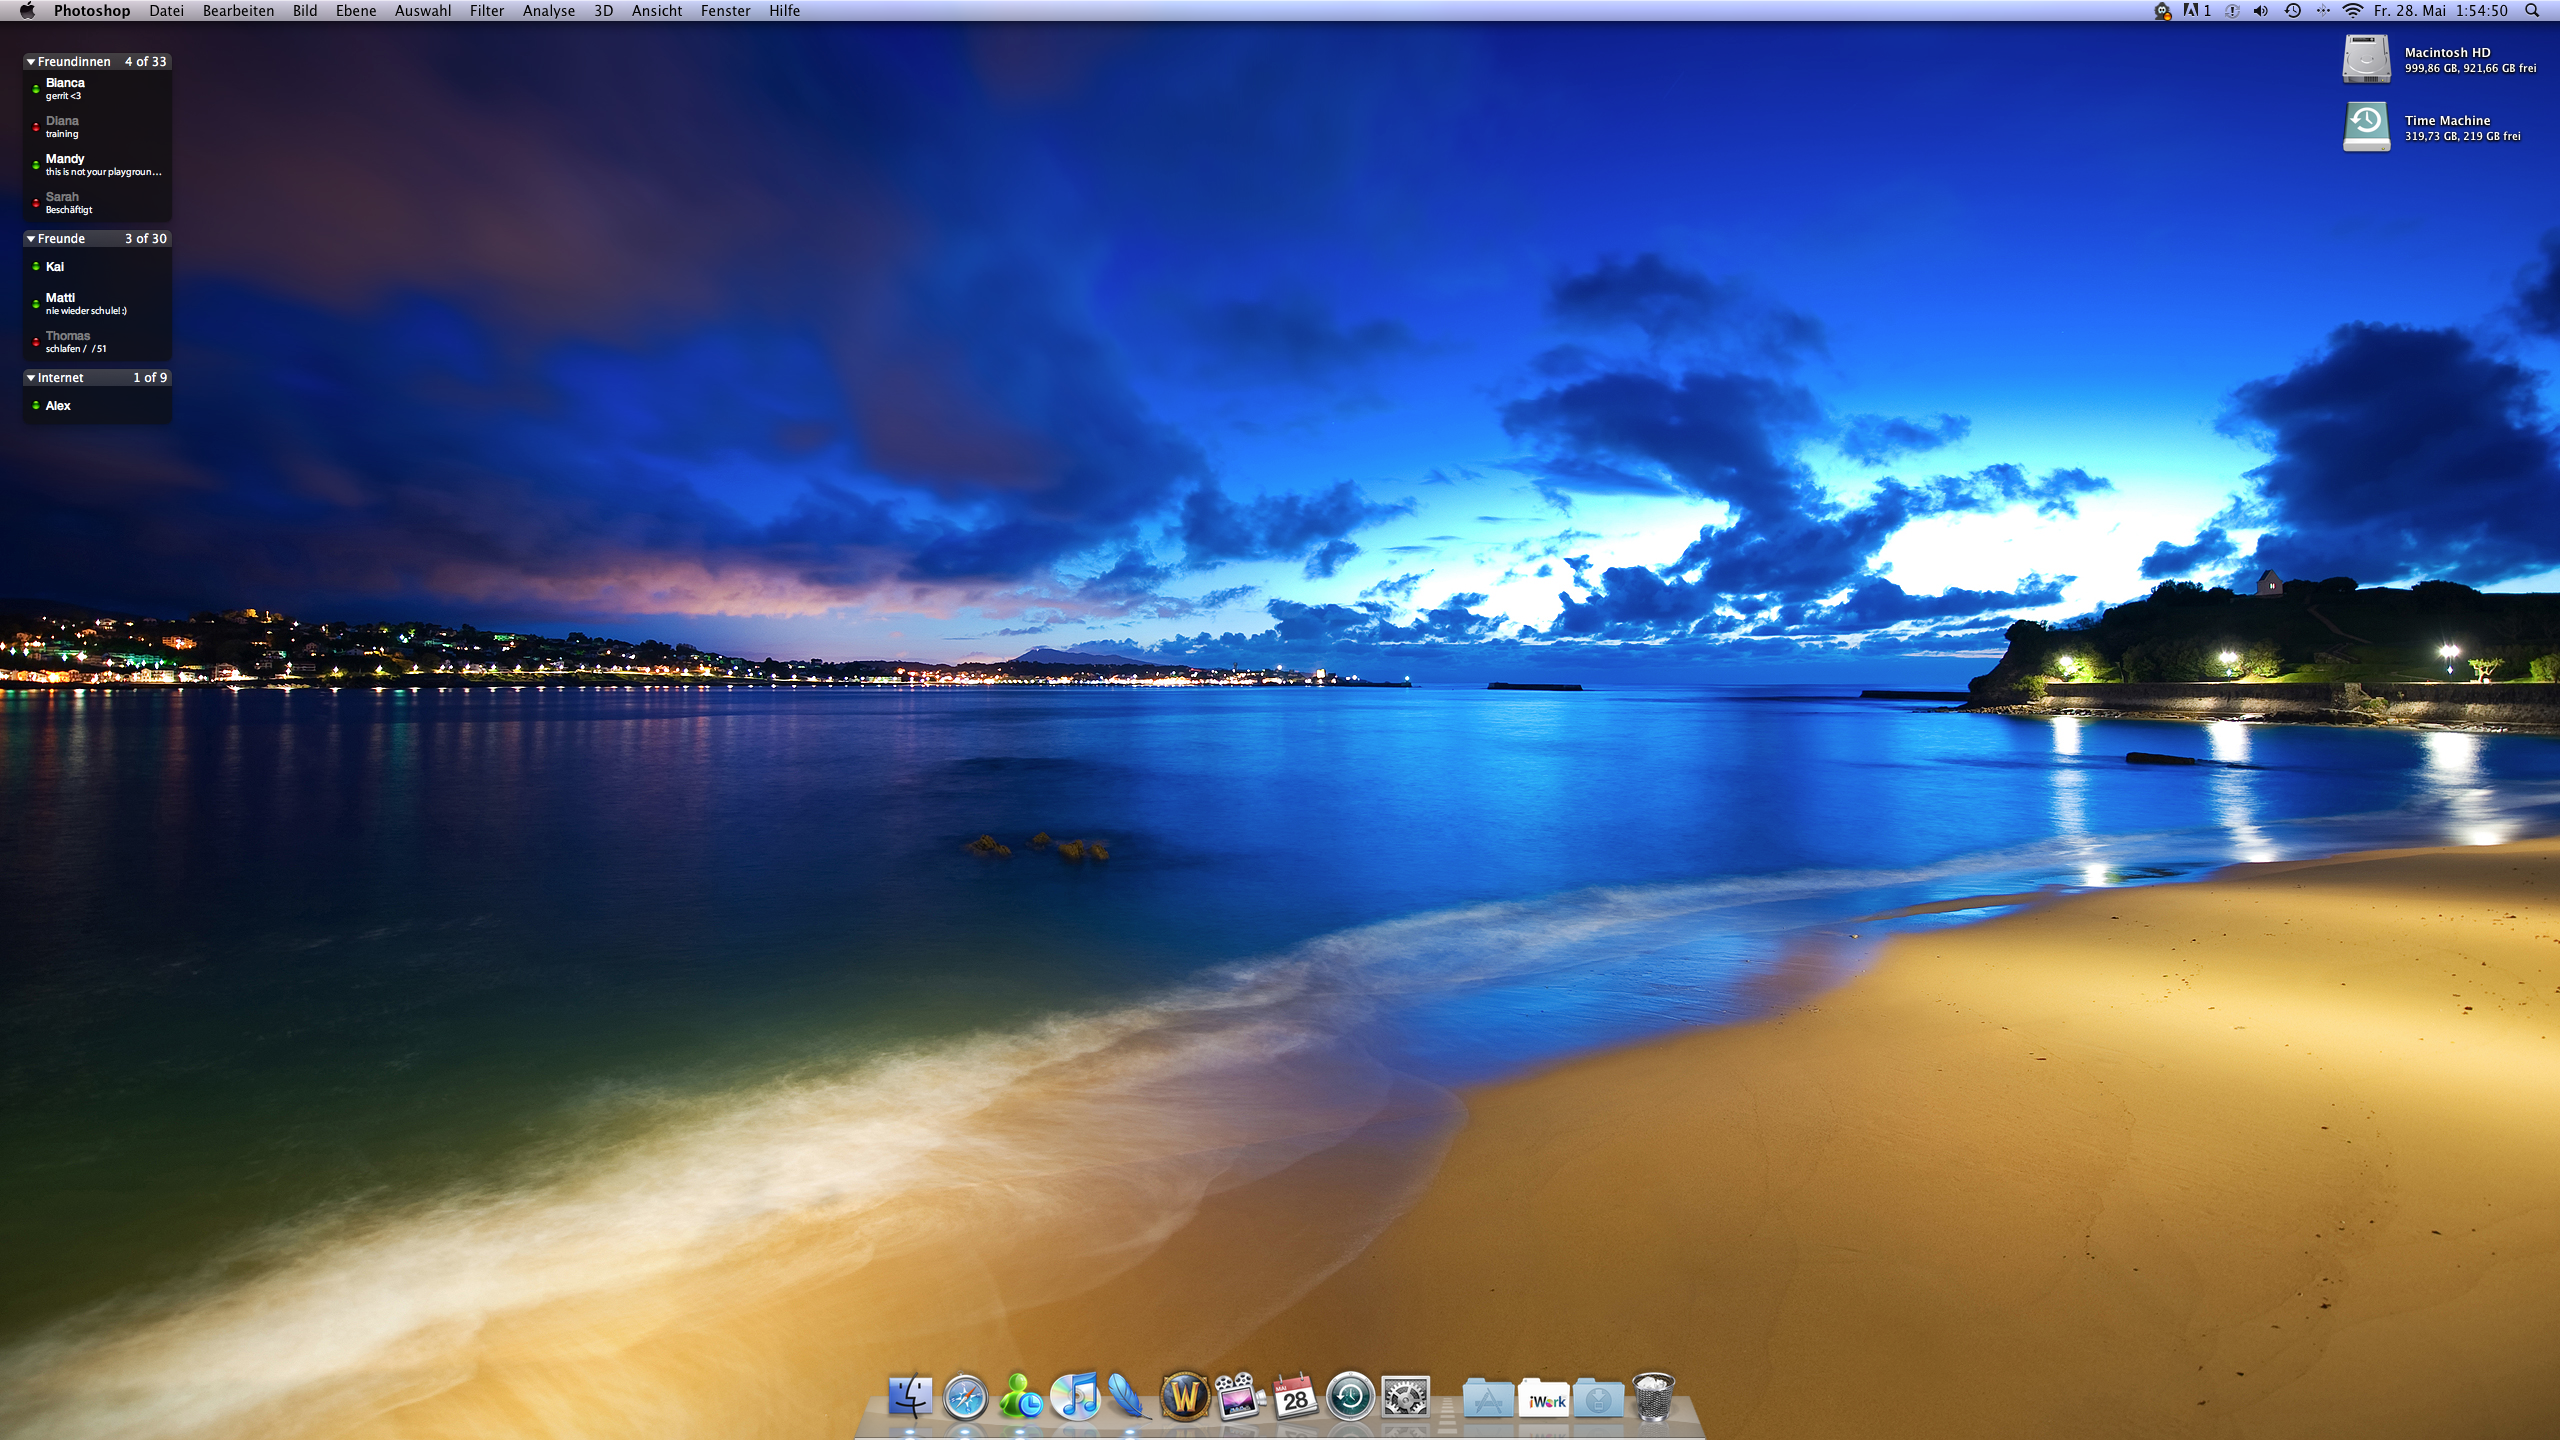 Best Imac 27 Inch Wallpaper Fcb A Ad A F F Ed Ea Wallpapers With